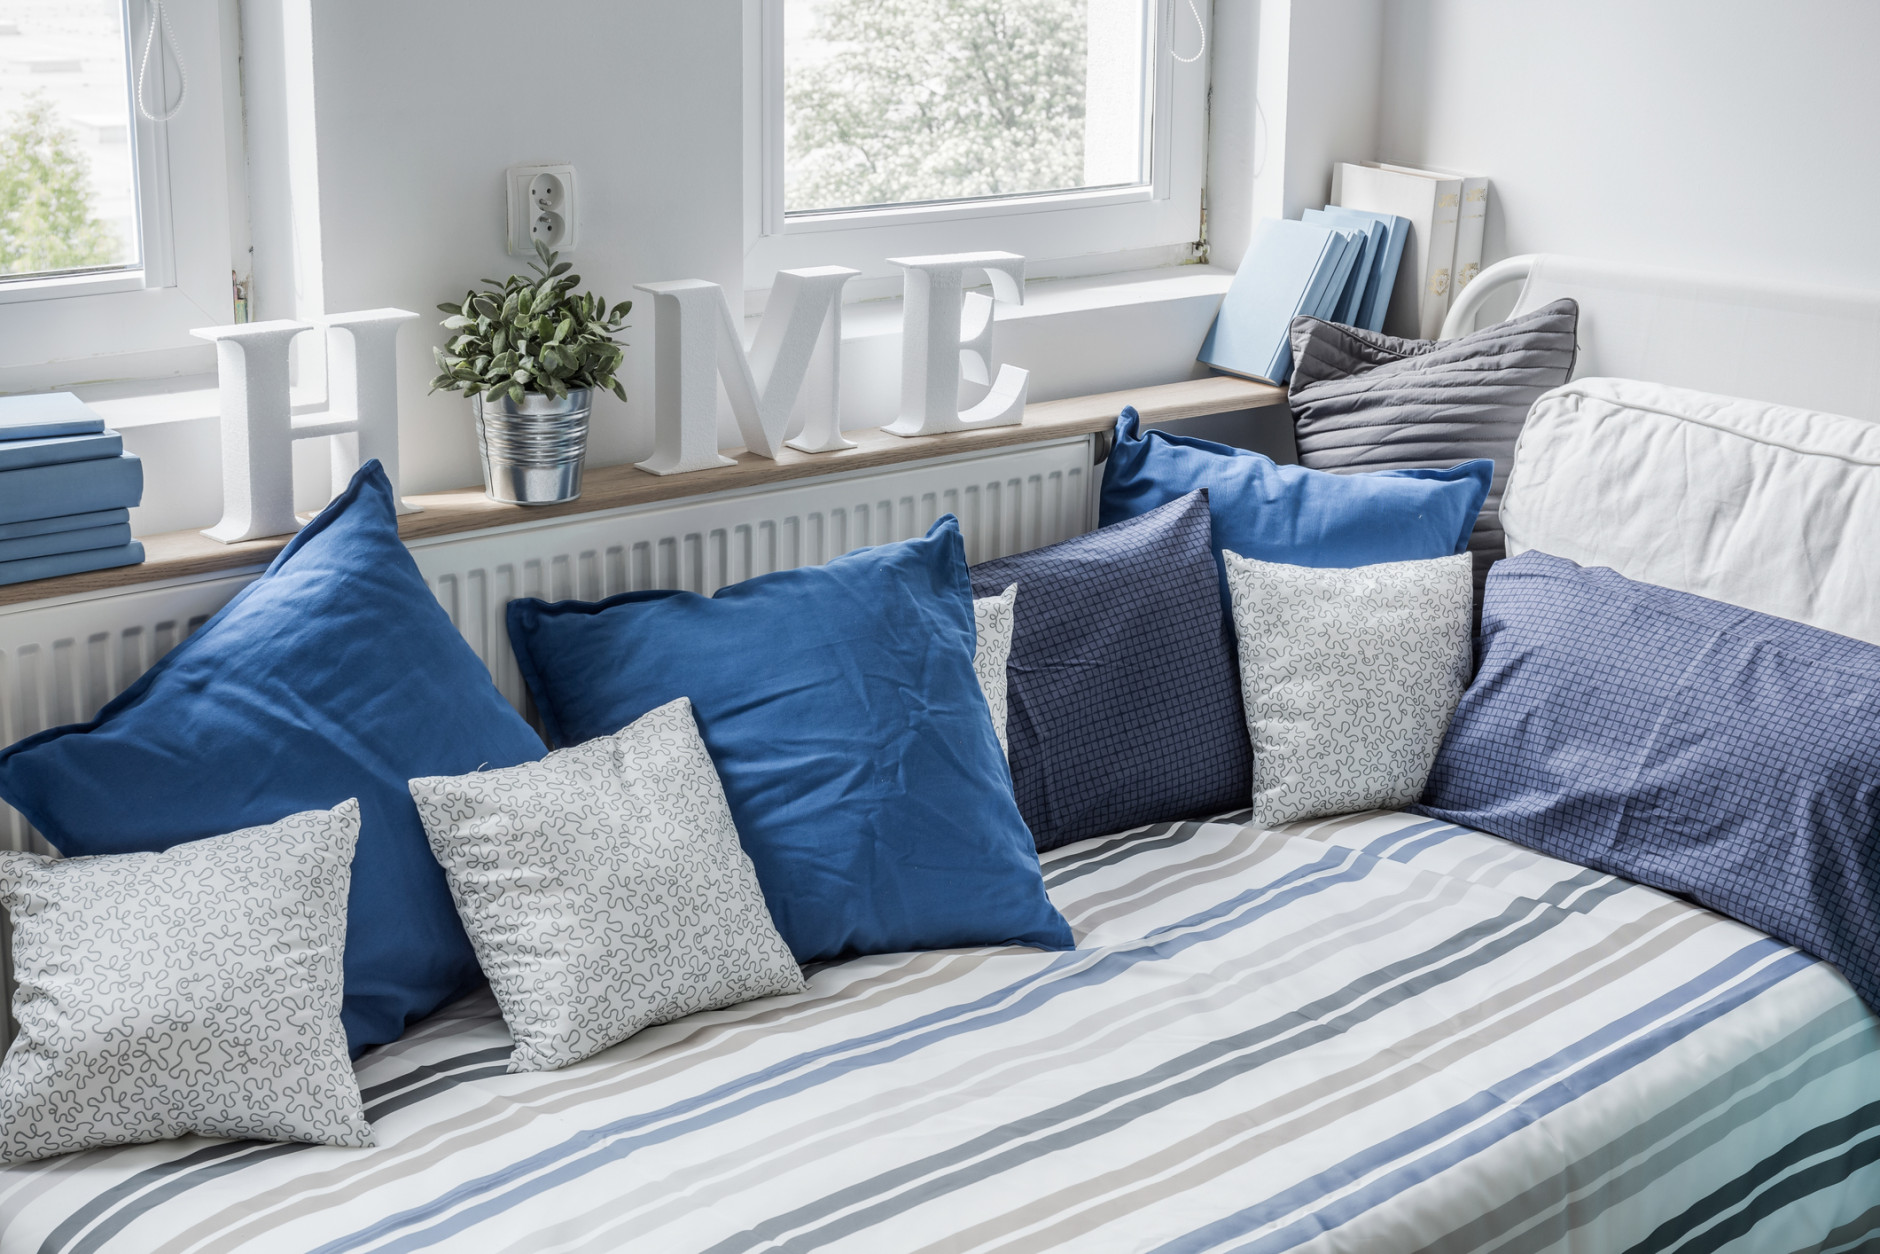 White and blue bedding set on the bed